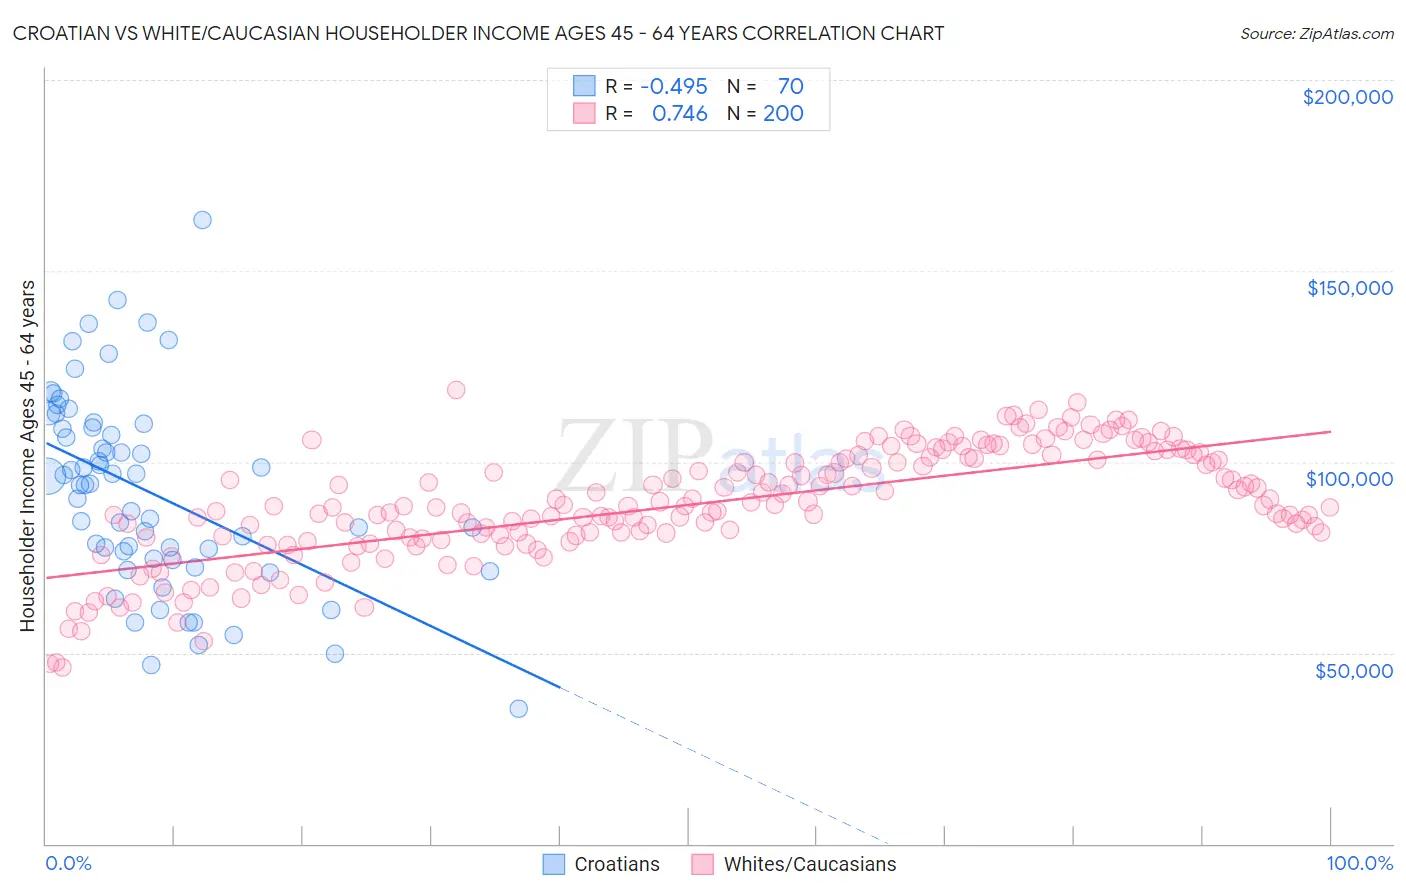 Croatian vs White/Caucasian Householder Income Ages 45 - 64 years